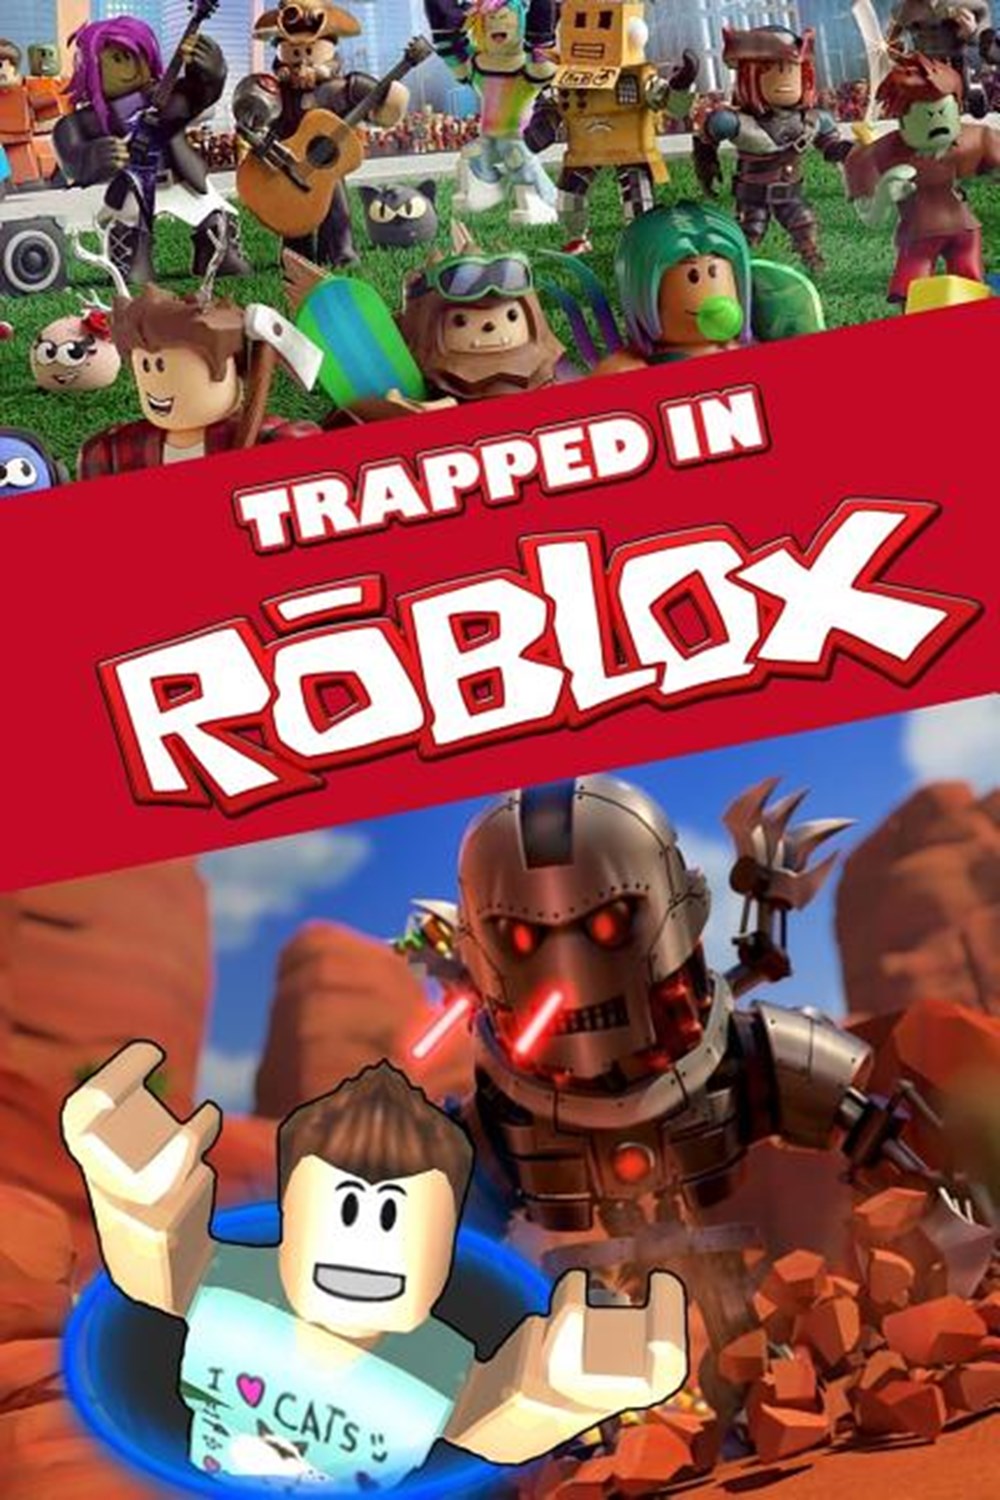 Trapped In Roblox An Action Packed Roblox Story By Vinyl Publishing - a roblox story book